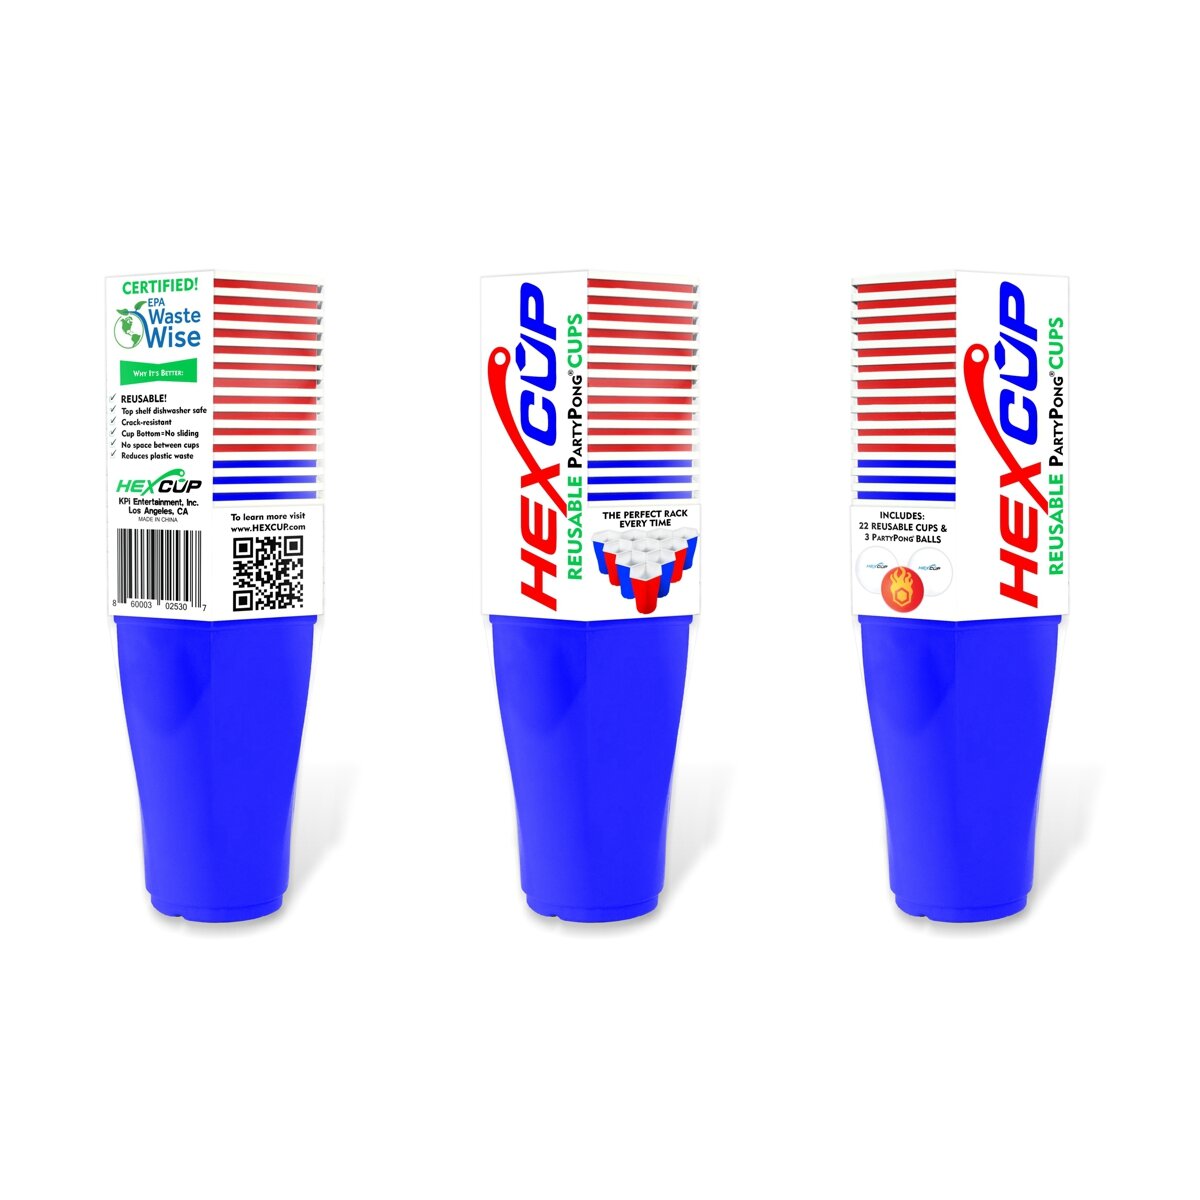 Reusable HEXCUP Beer Pong Party Cup Set by PartyPong FREE SHIPPING 